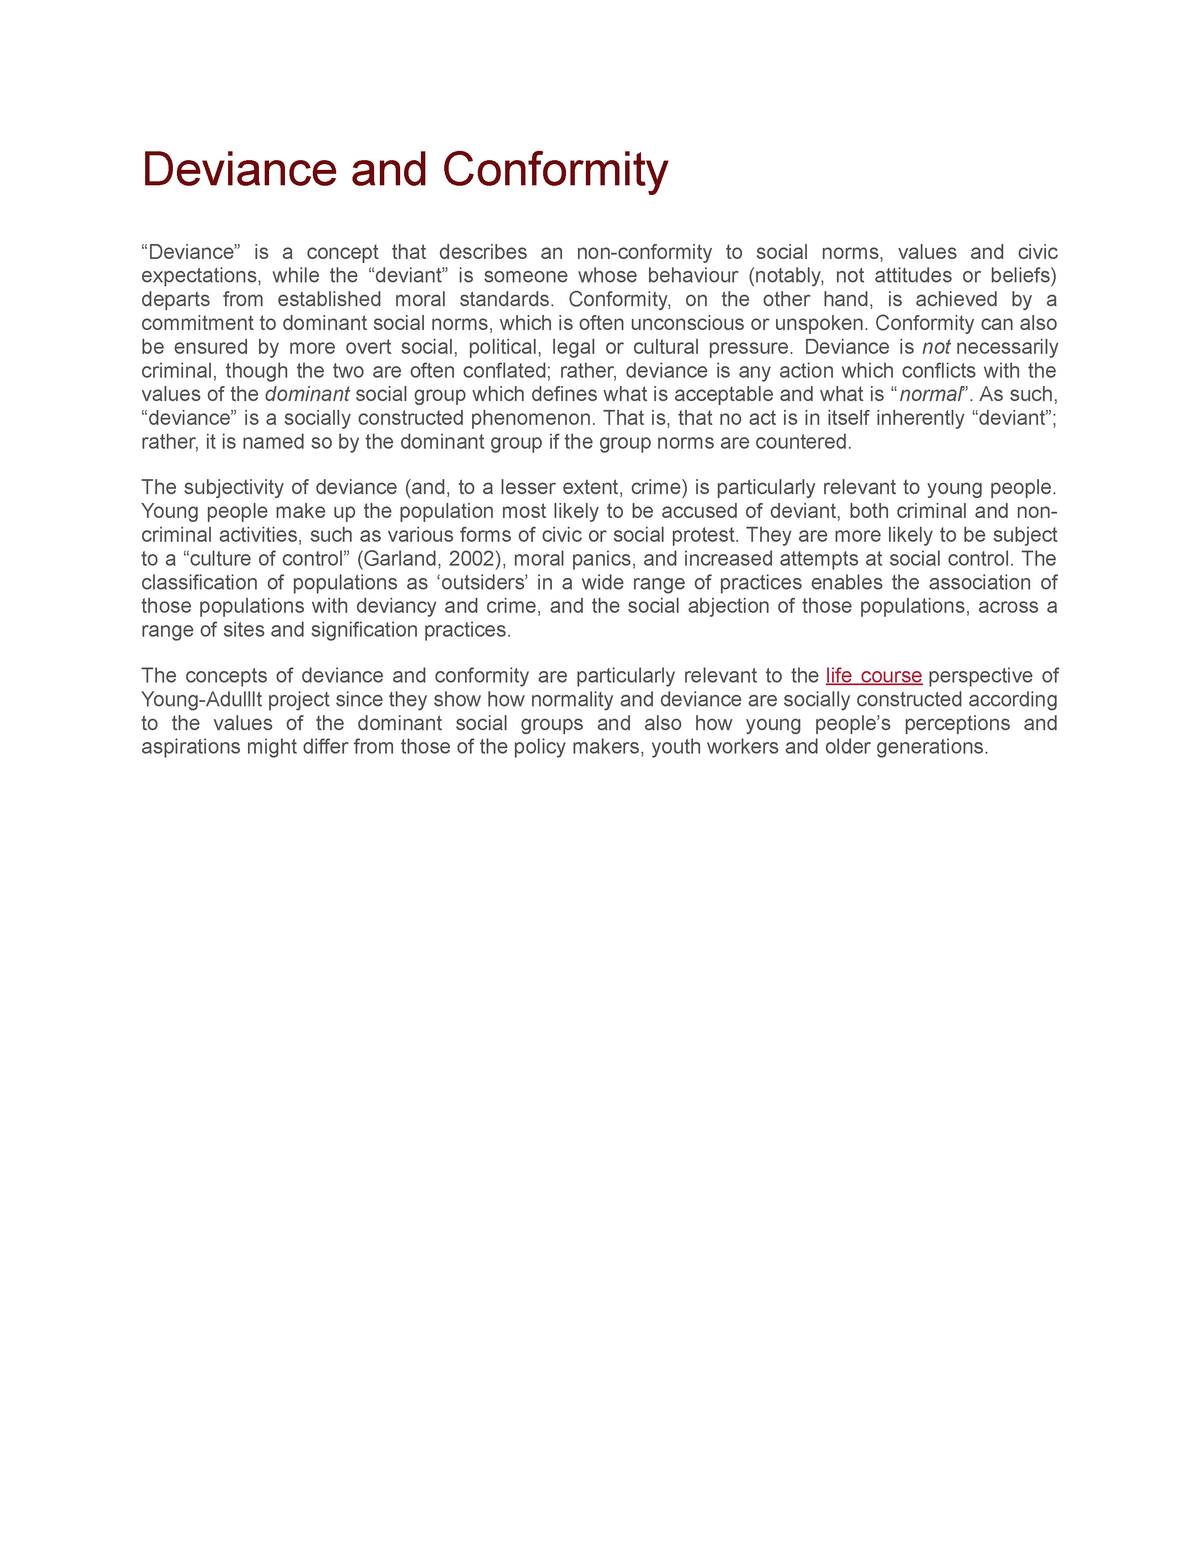 essay about conformity and deviance